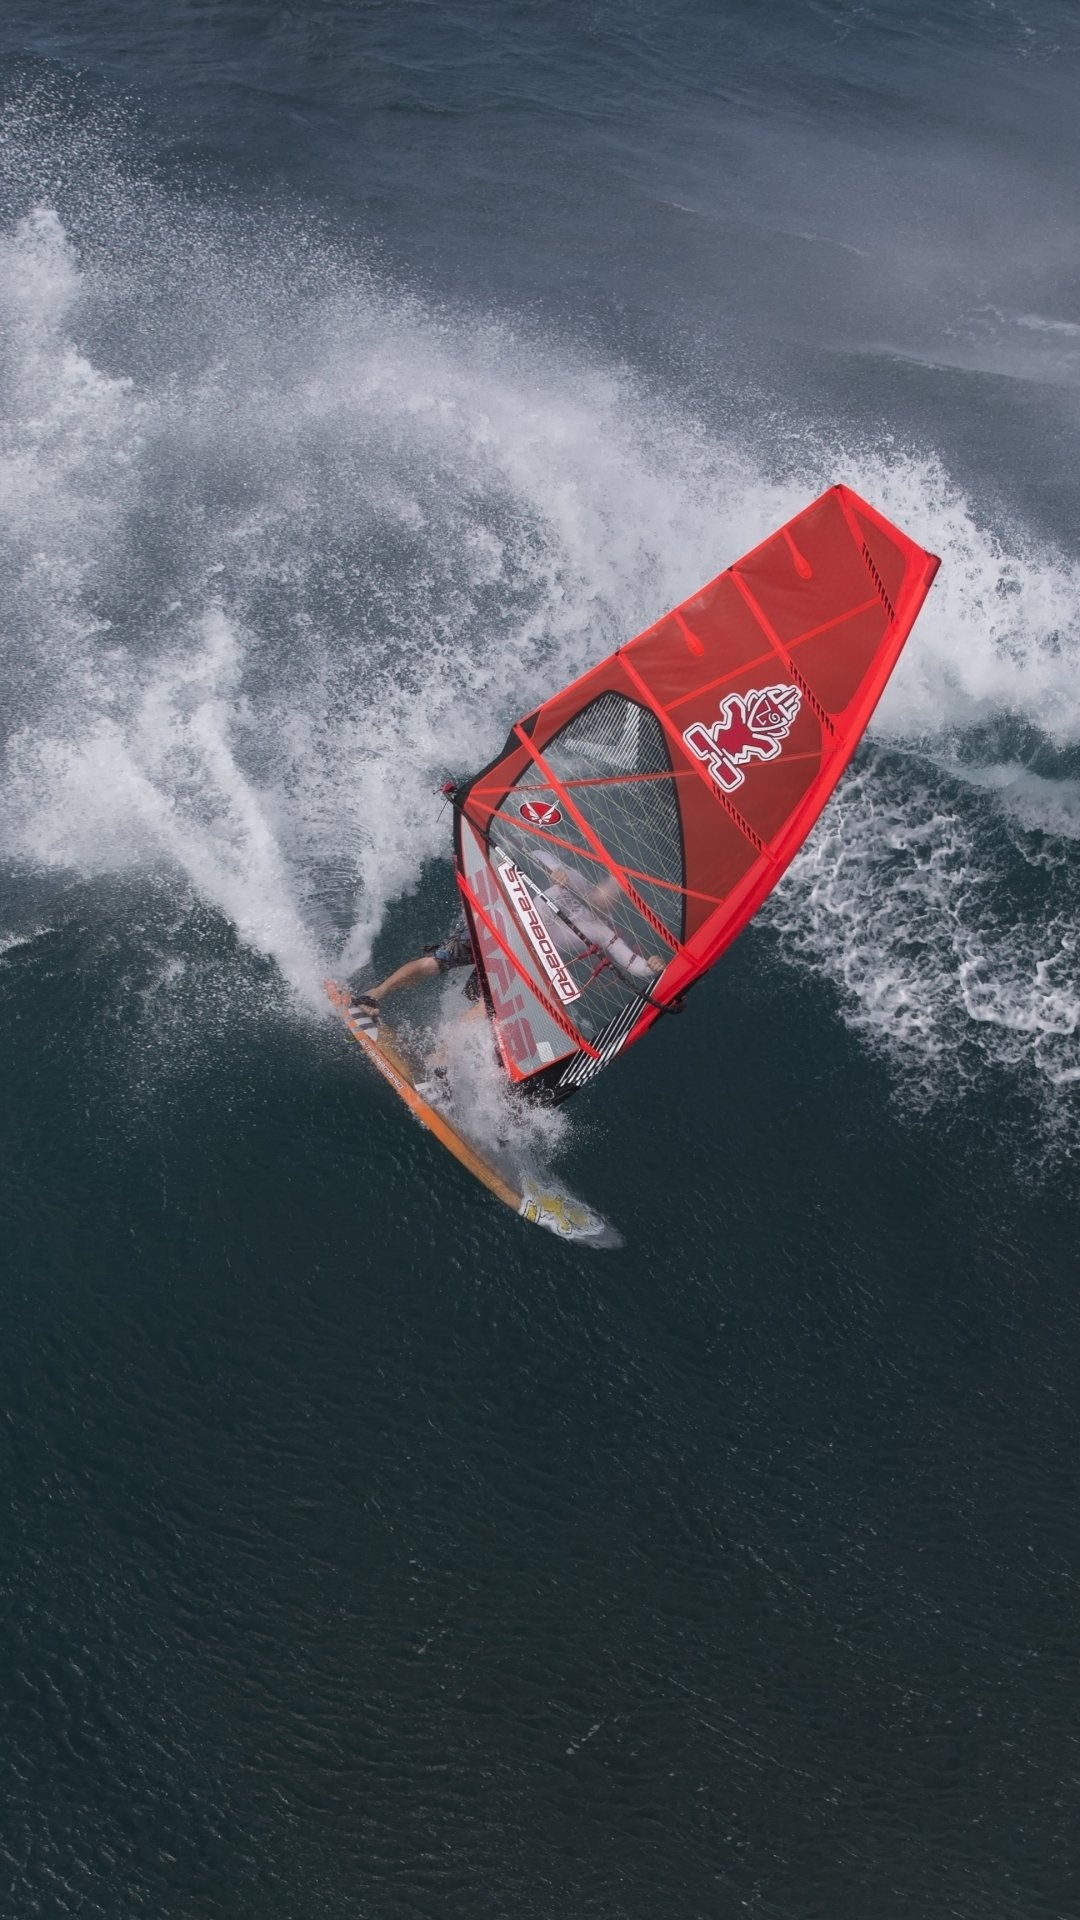 Windsurfing: Sports Windsurfing, Boating, Sailing and Water Sports 2022, Annual Shows. 1080x1920 Full HD Wallpaper.